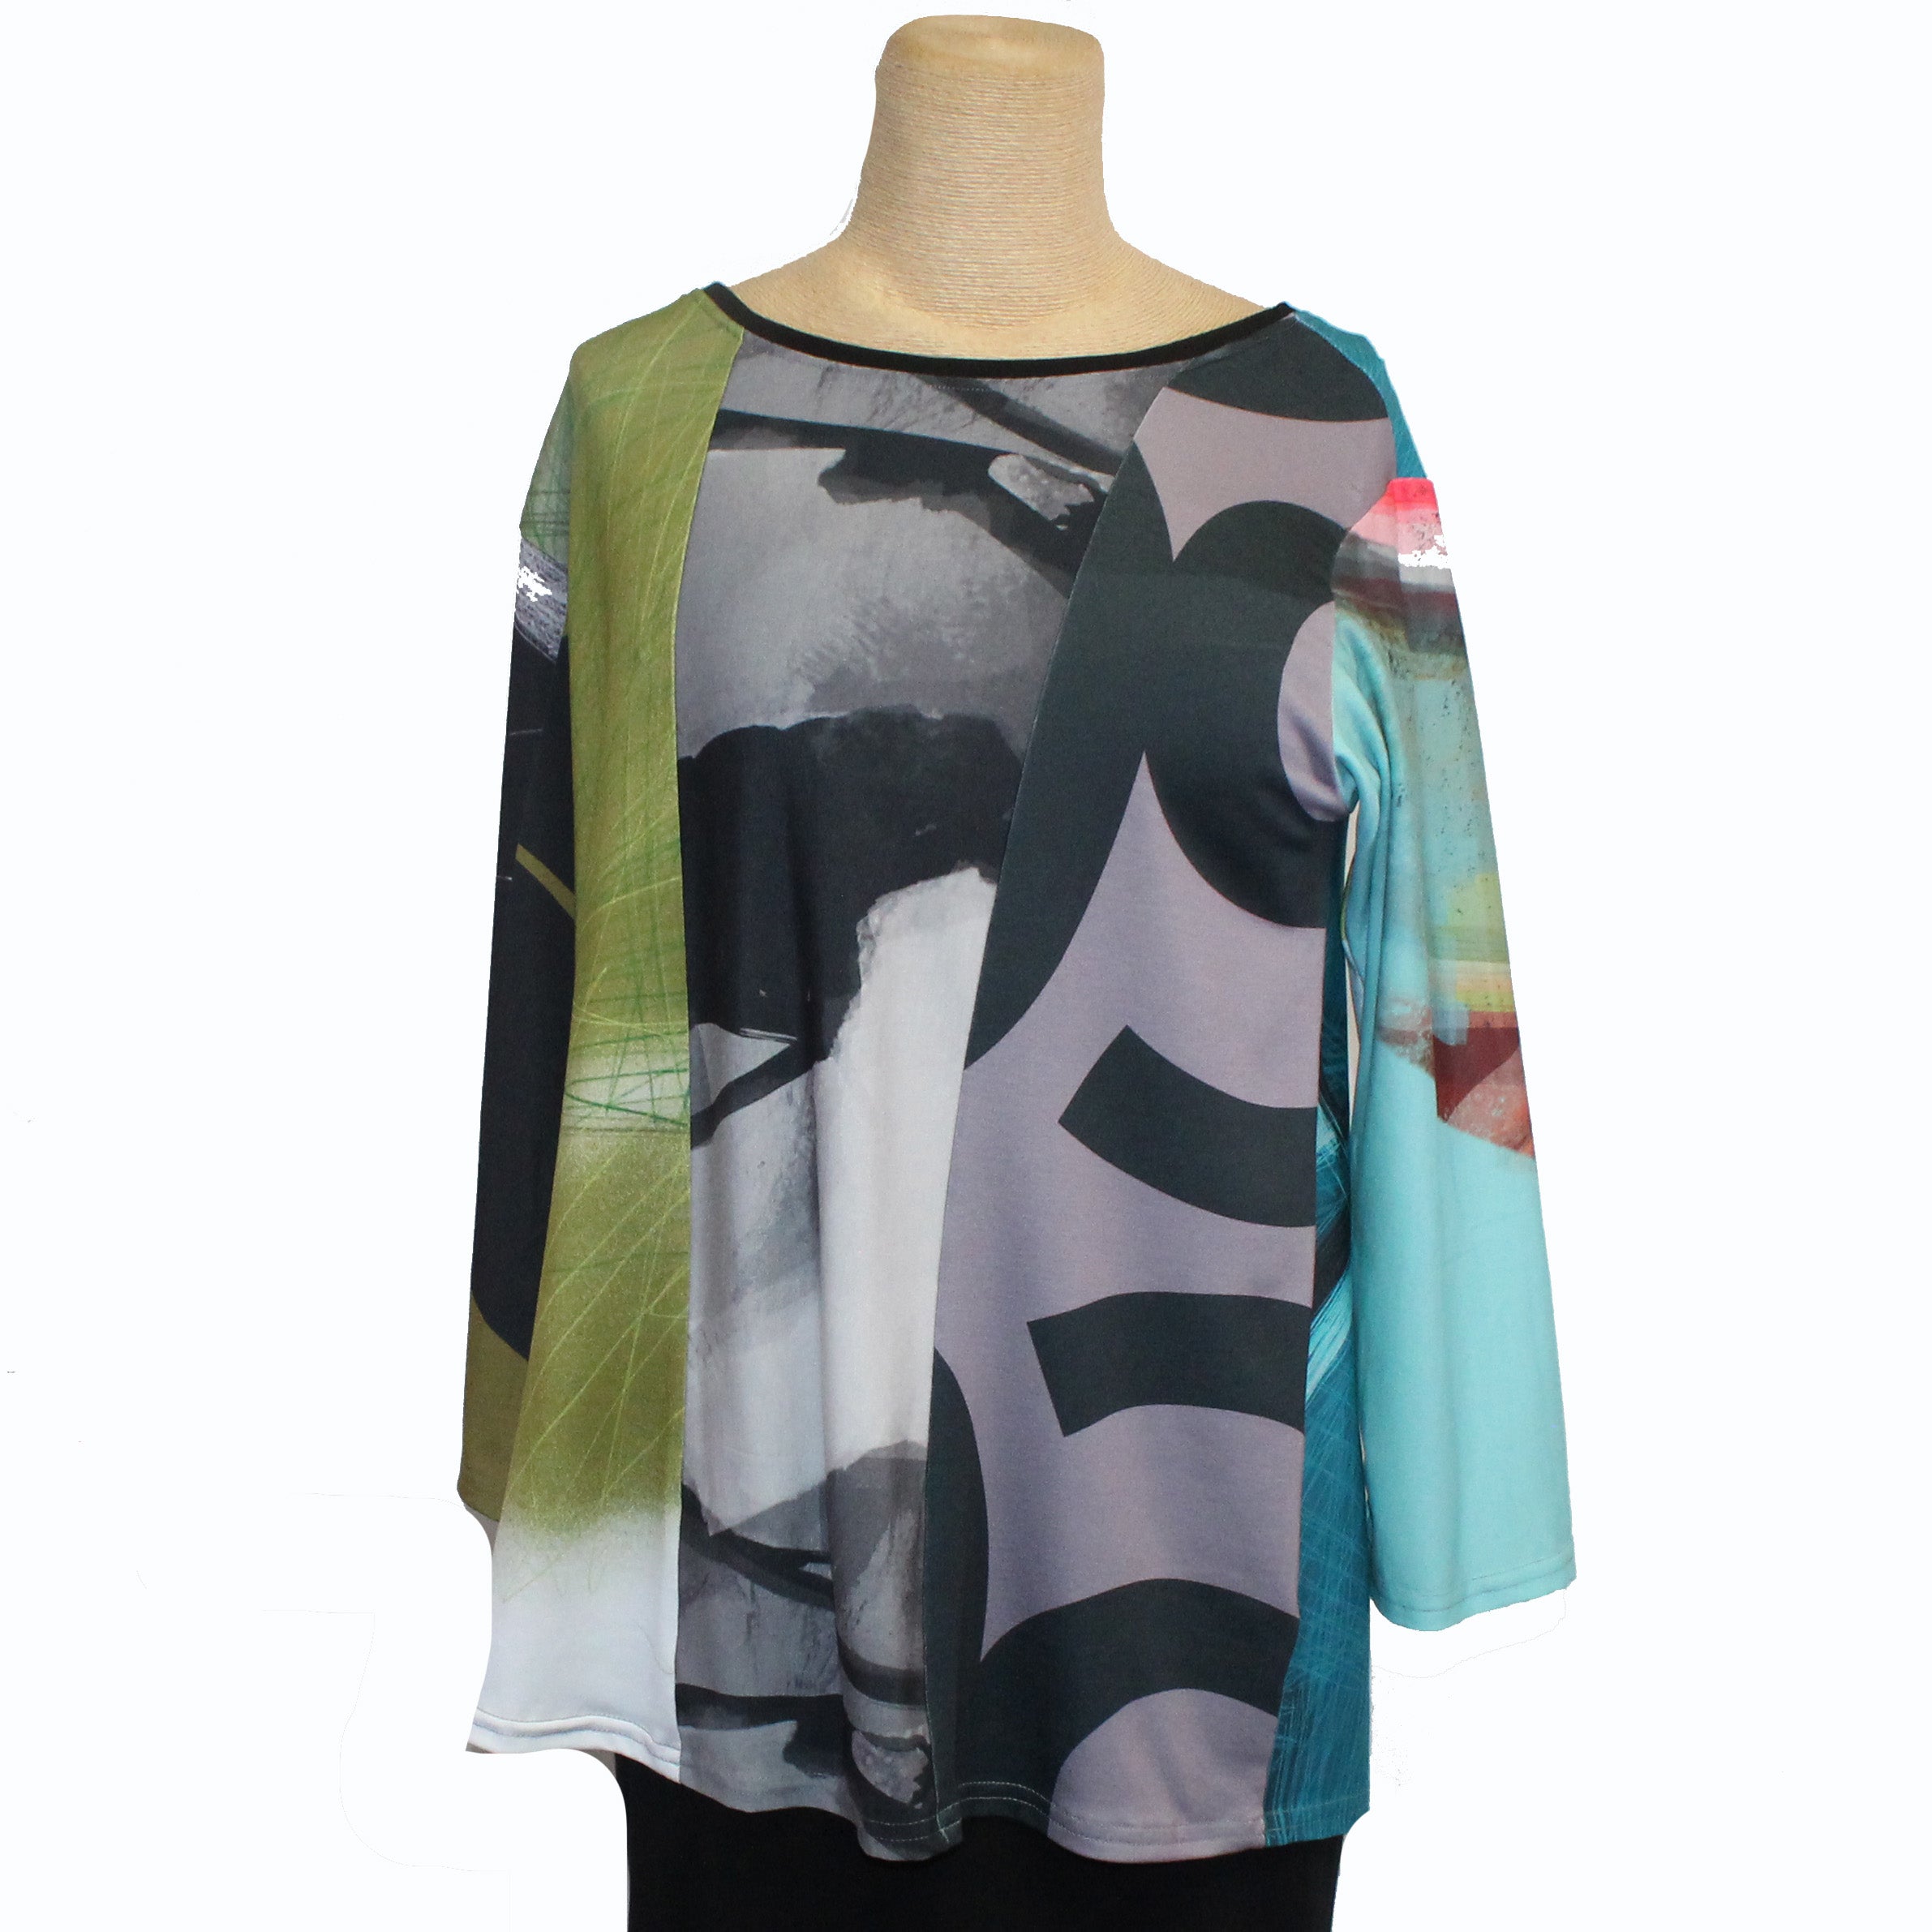 Andrea Geer Boxy Pullover, 3/4 Sleeve, Brights 3, XS/S